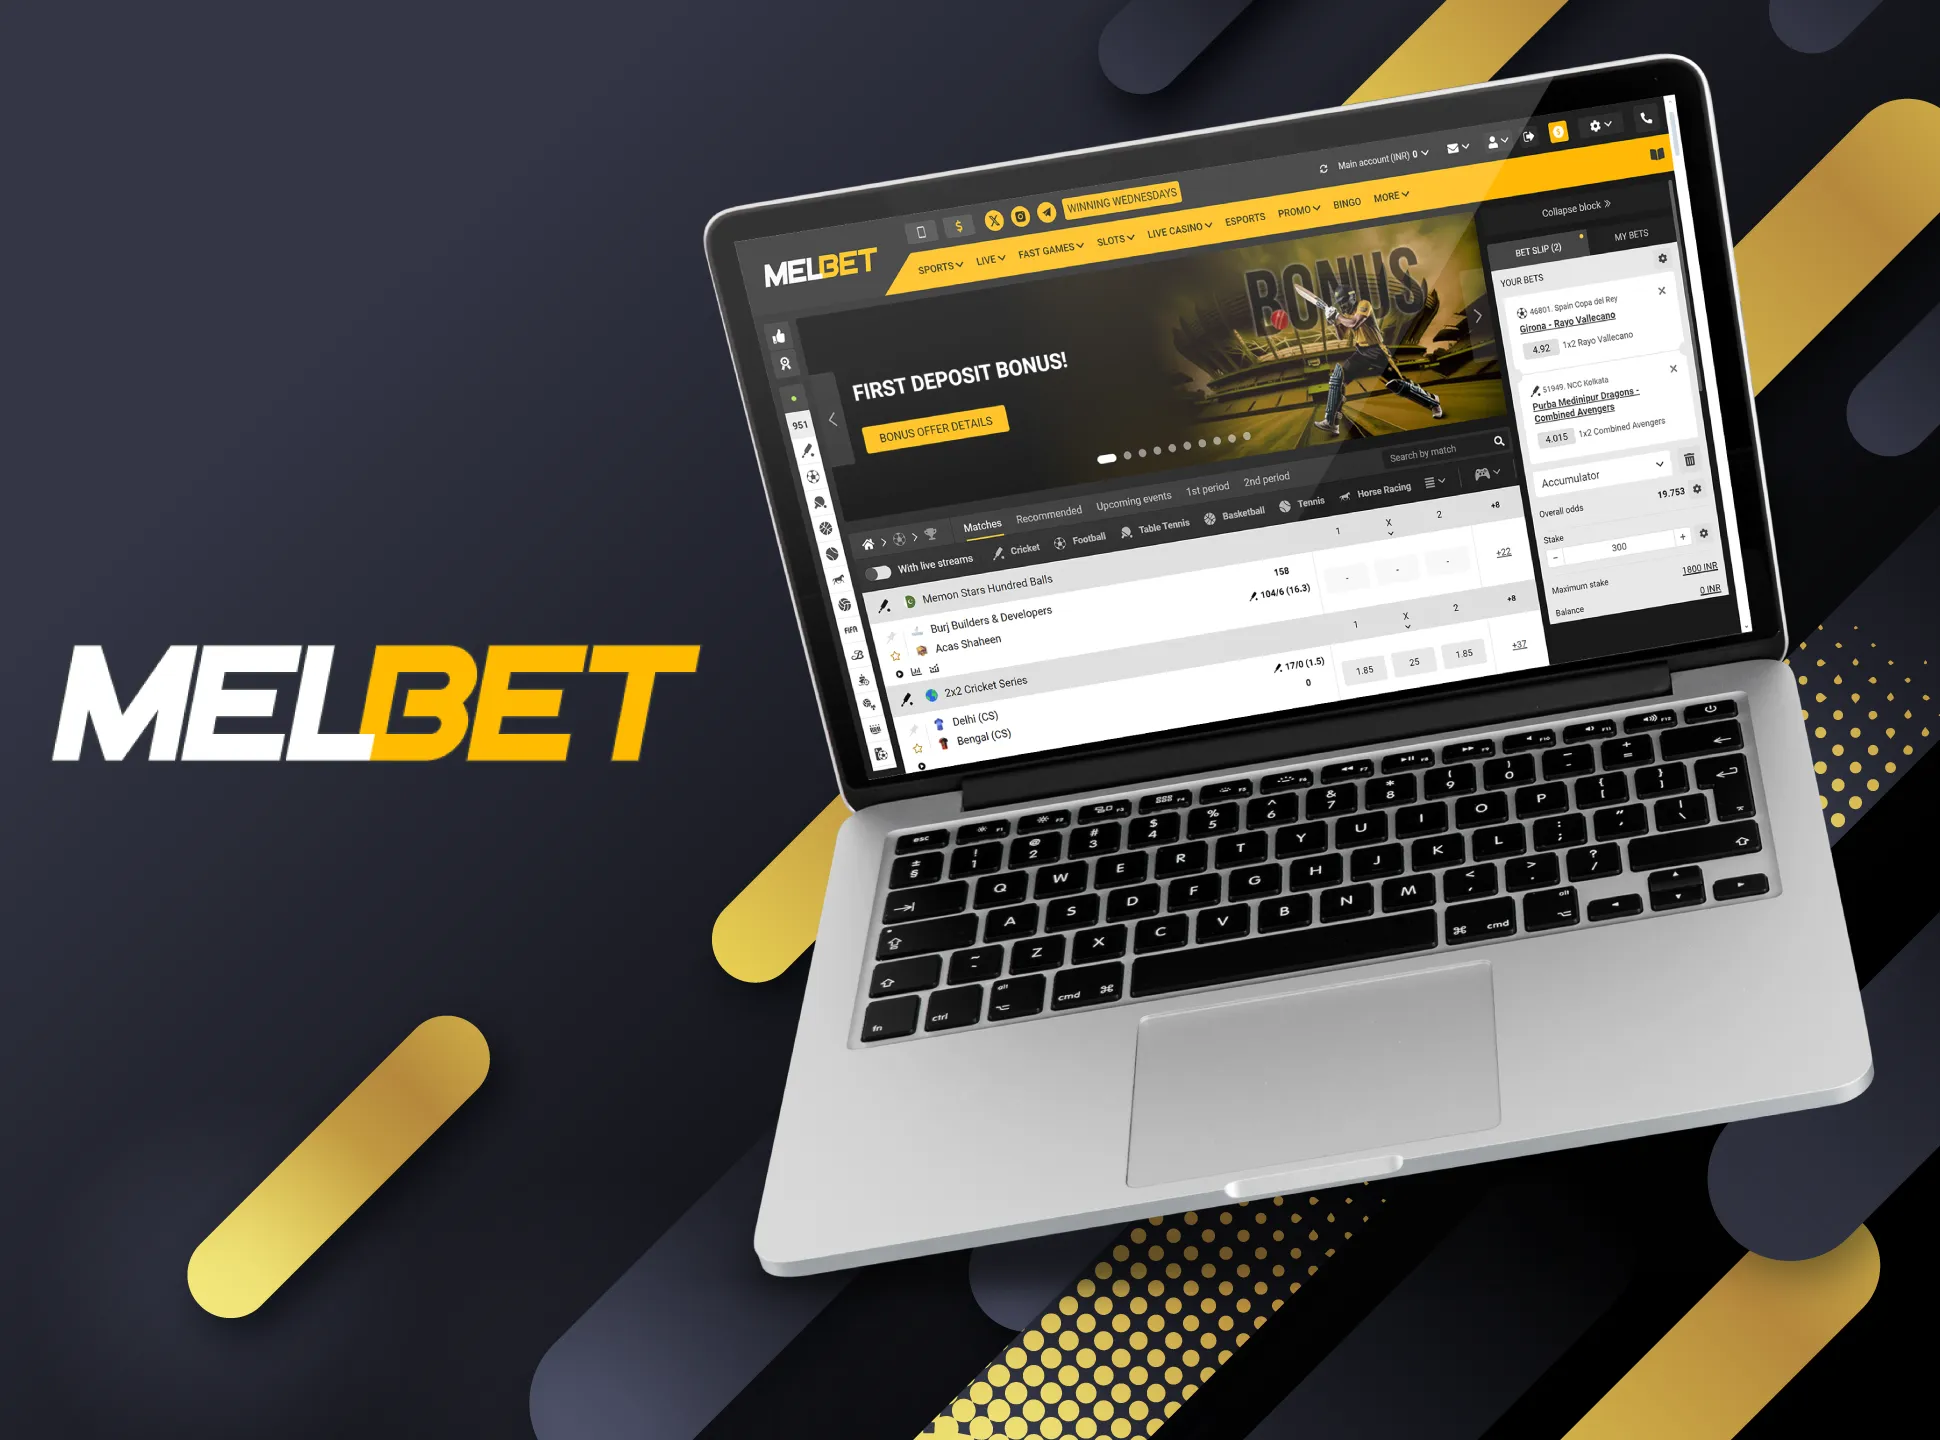 There is also the Melbet PC app that you can install on your laptop.